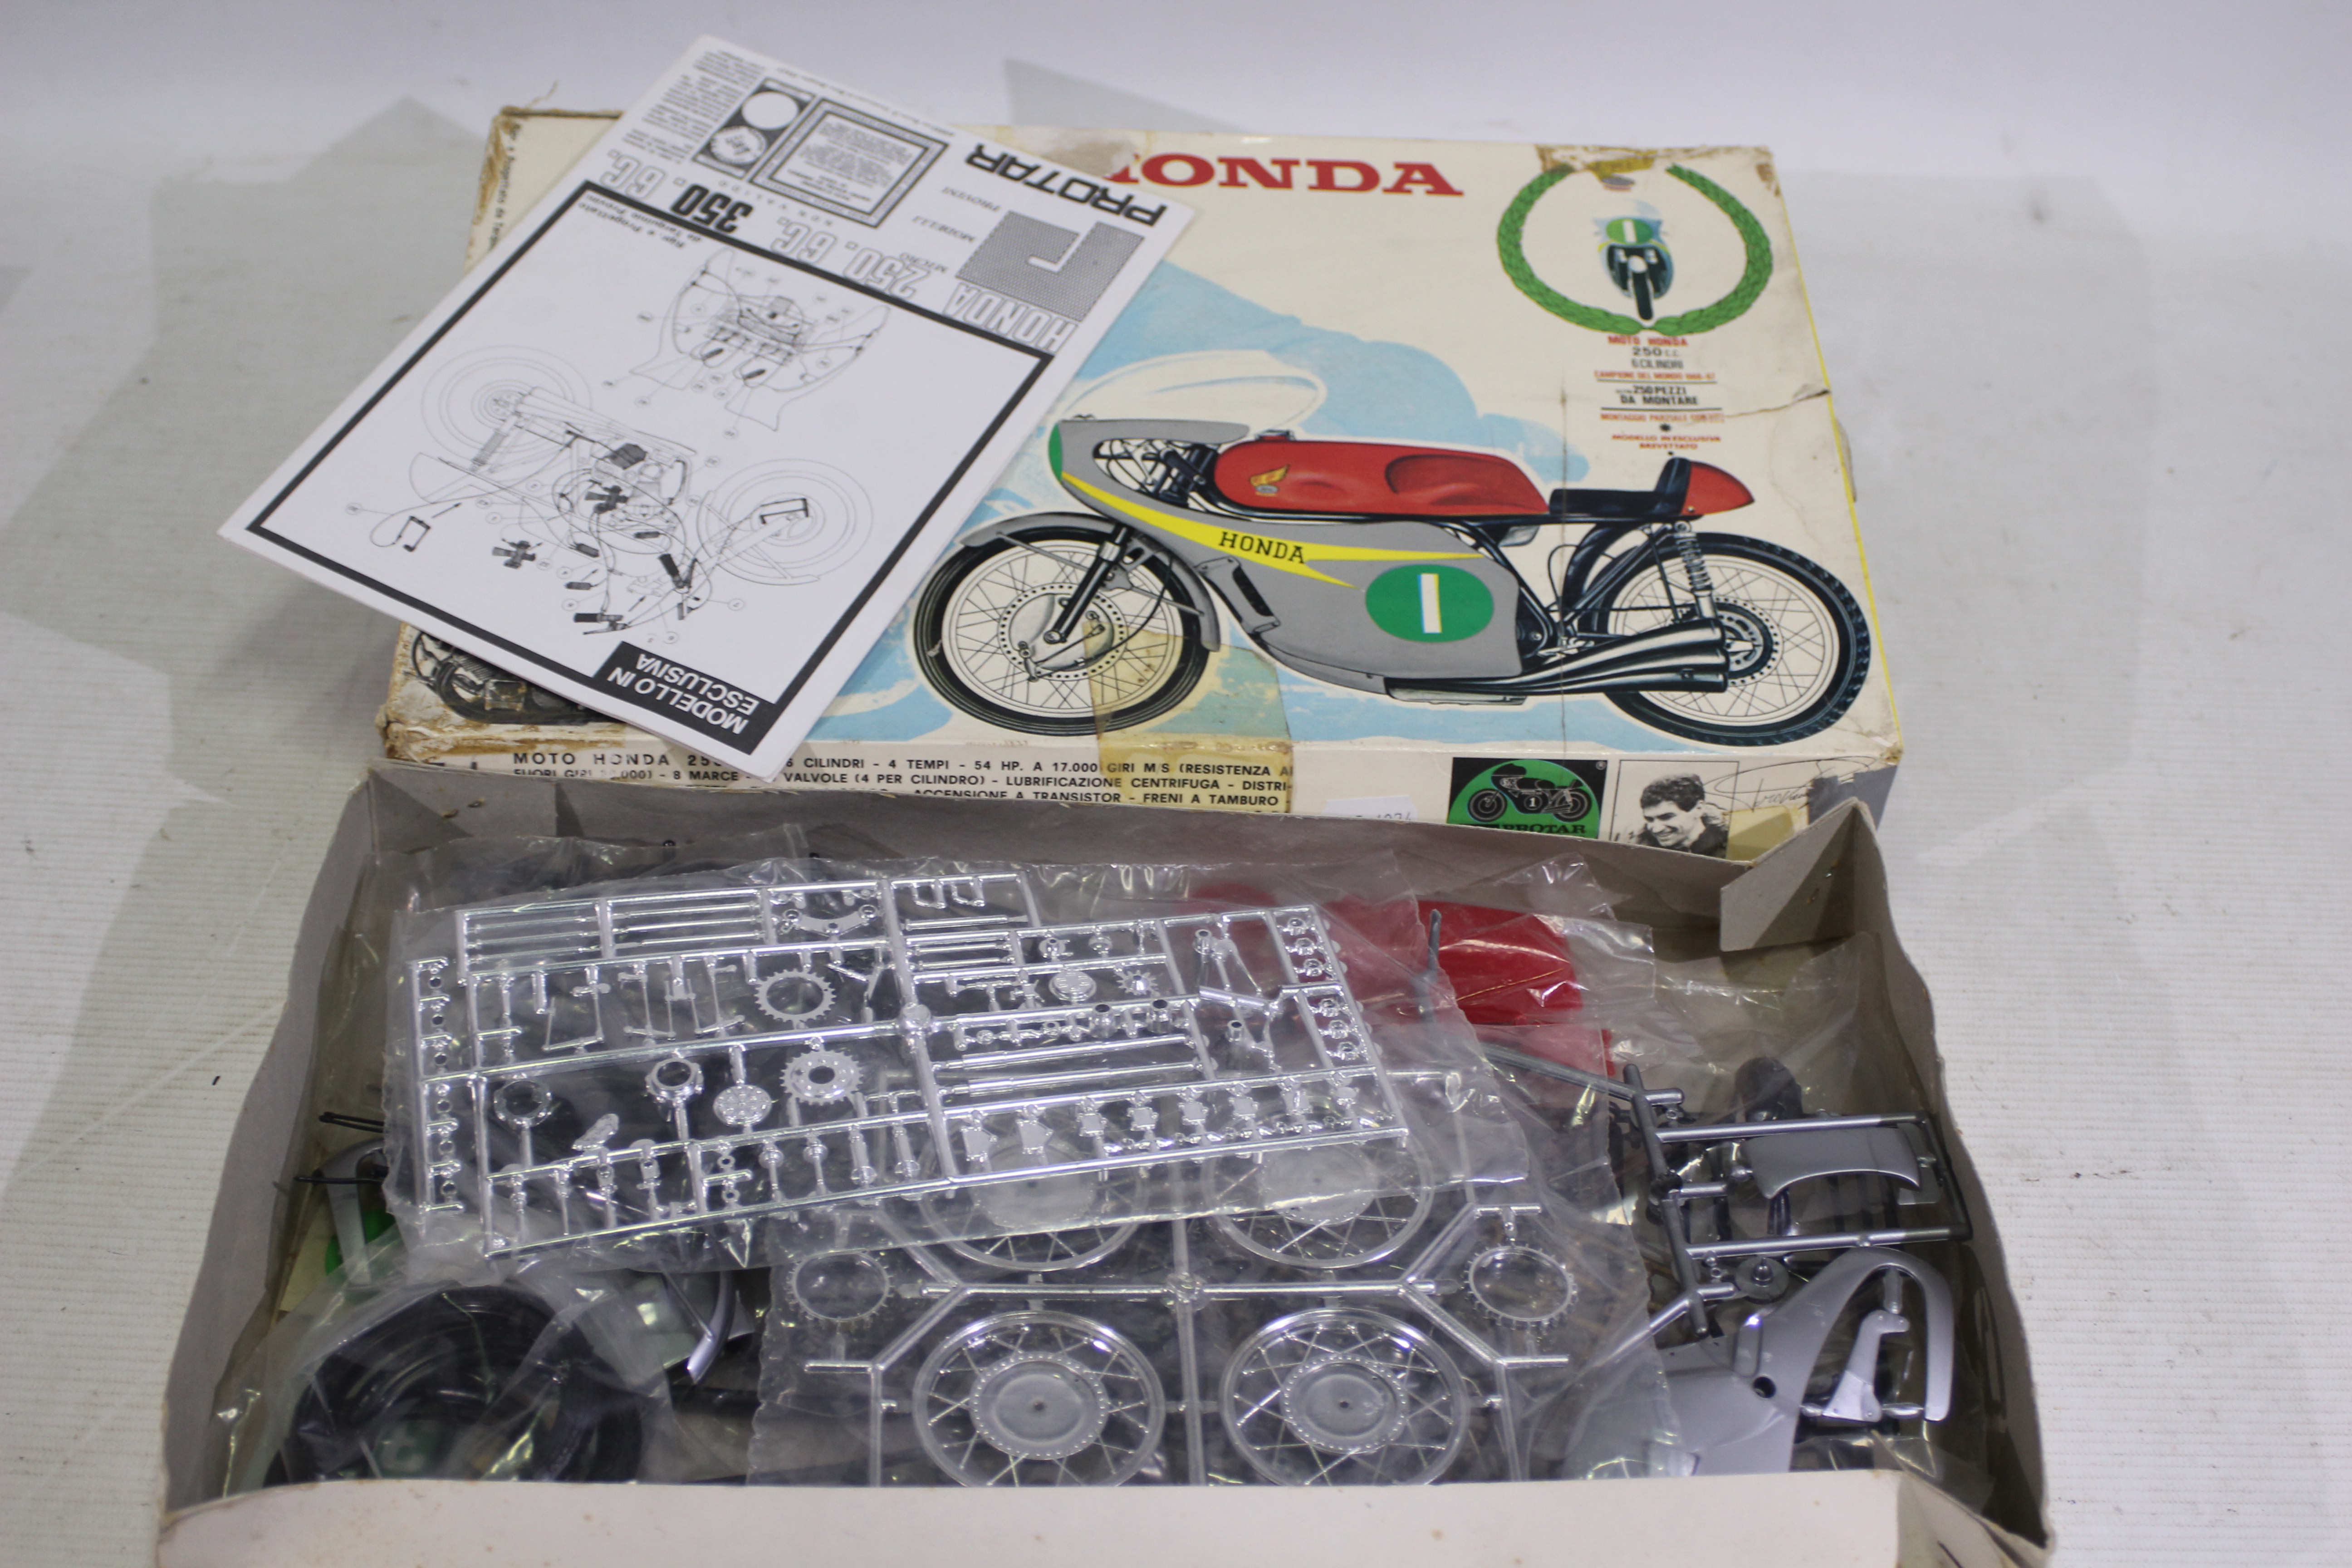 Protar - Airfix - 3 x boxed model kits, a vintage Moto Honda 250 kit in 1:9 scale, - Image 3 of 3